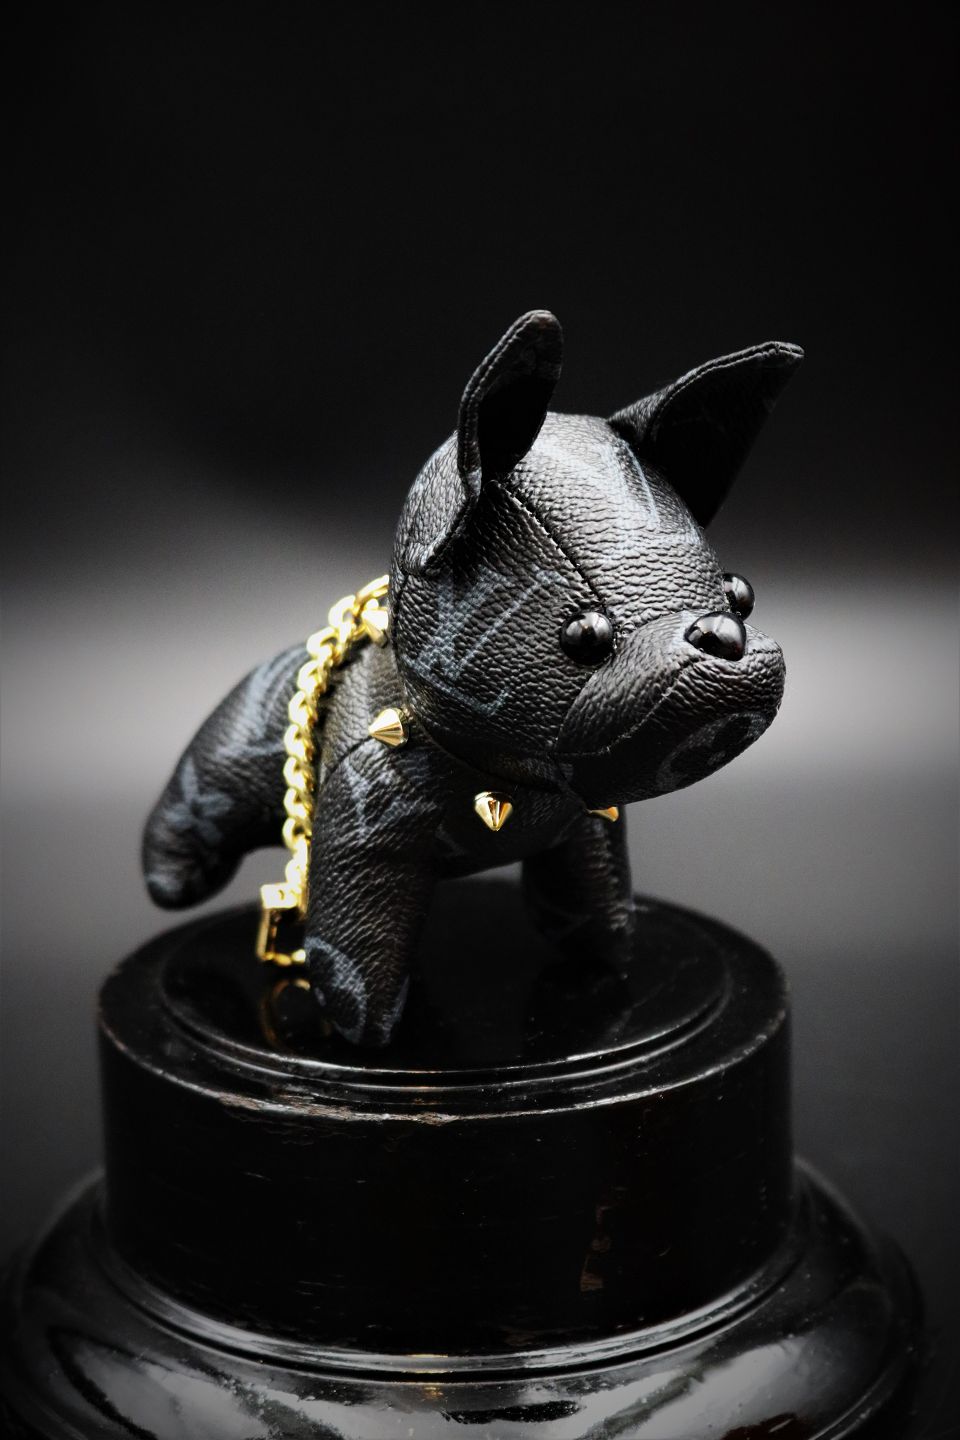 K&Co - Louis Vuitton accessories, bag pendant in the shape of a small dog  with the Mono